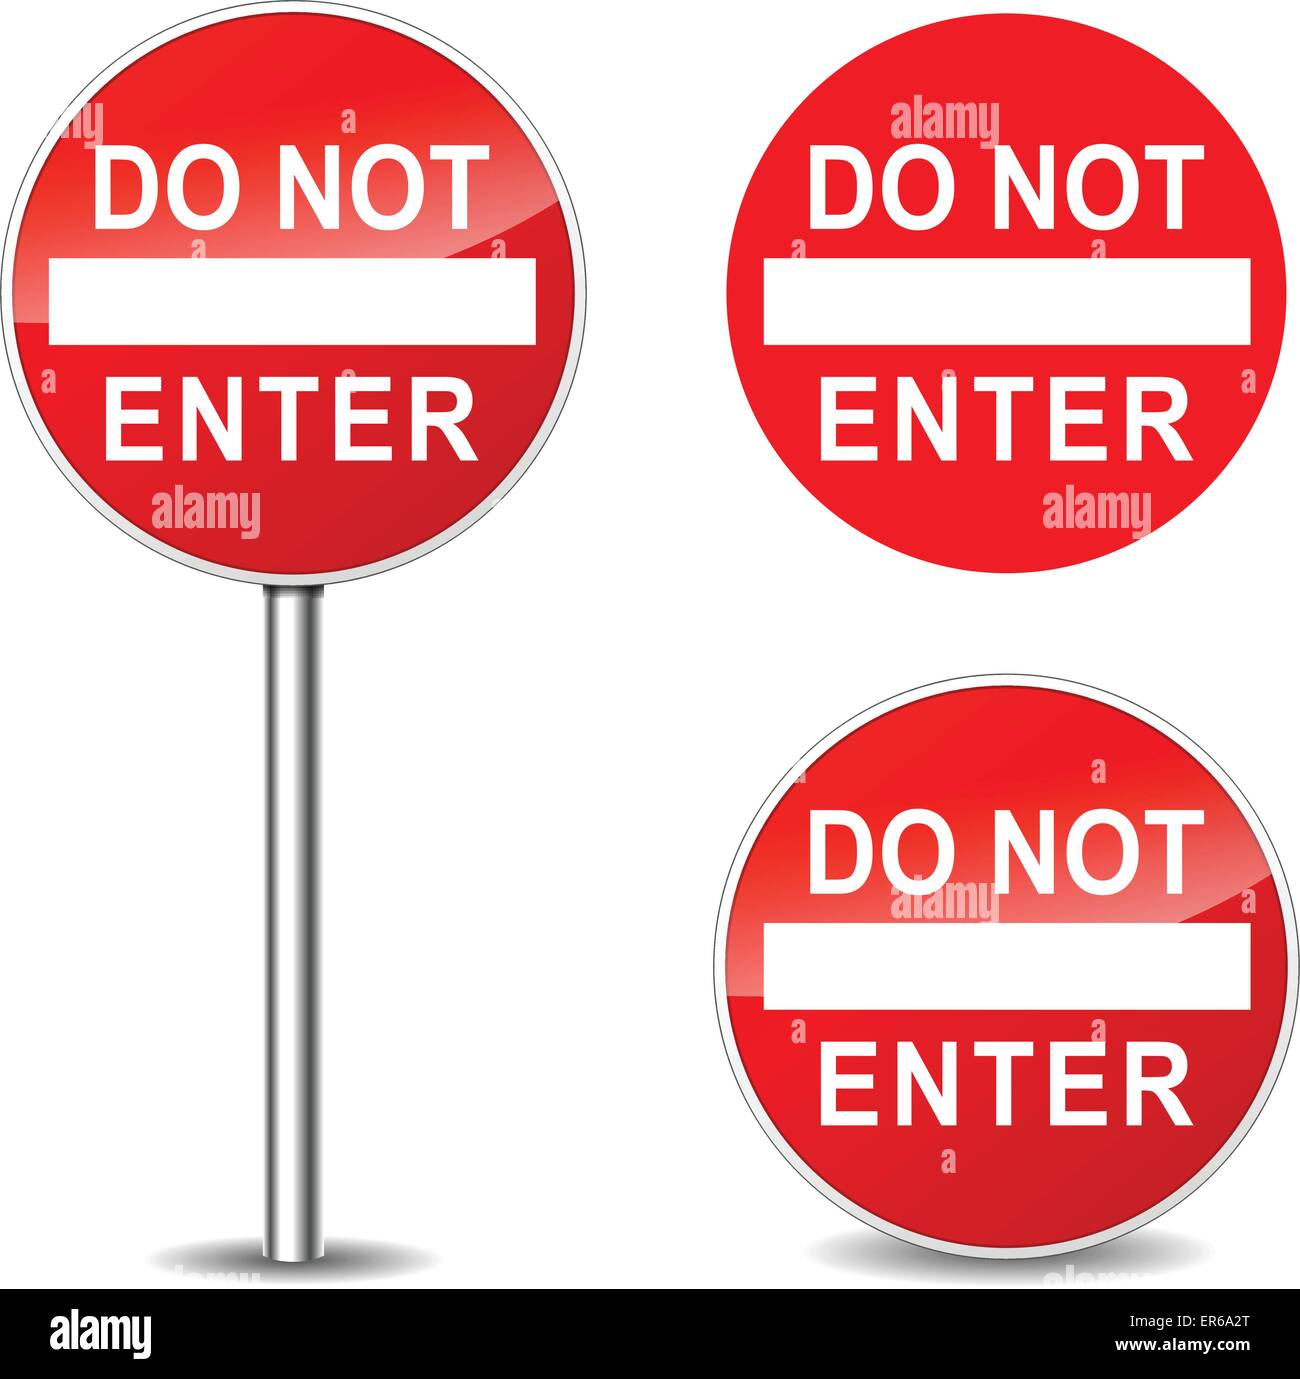 Vector illustration of do not enter round signs Stock Vector